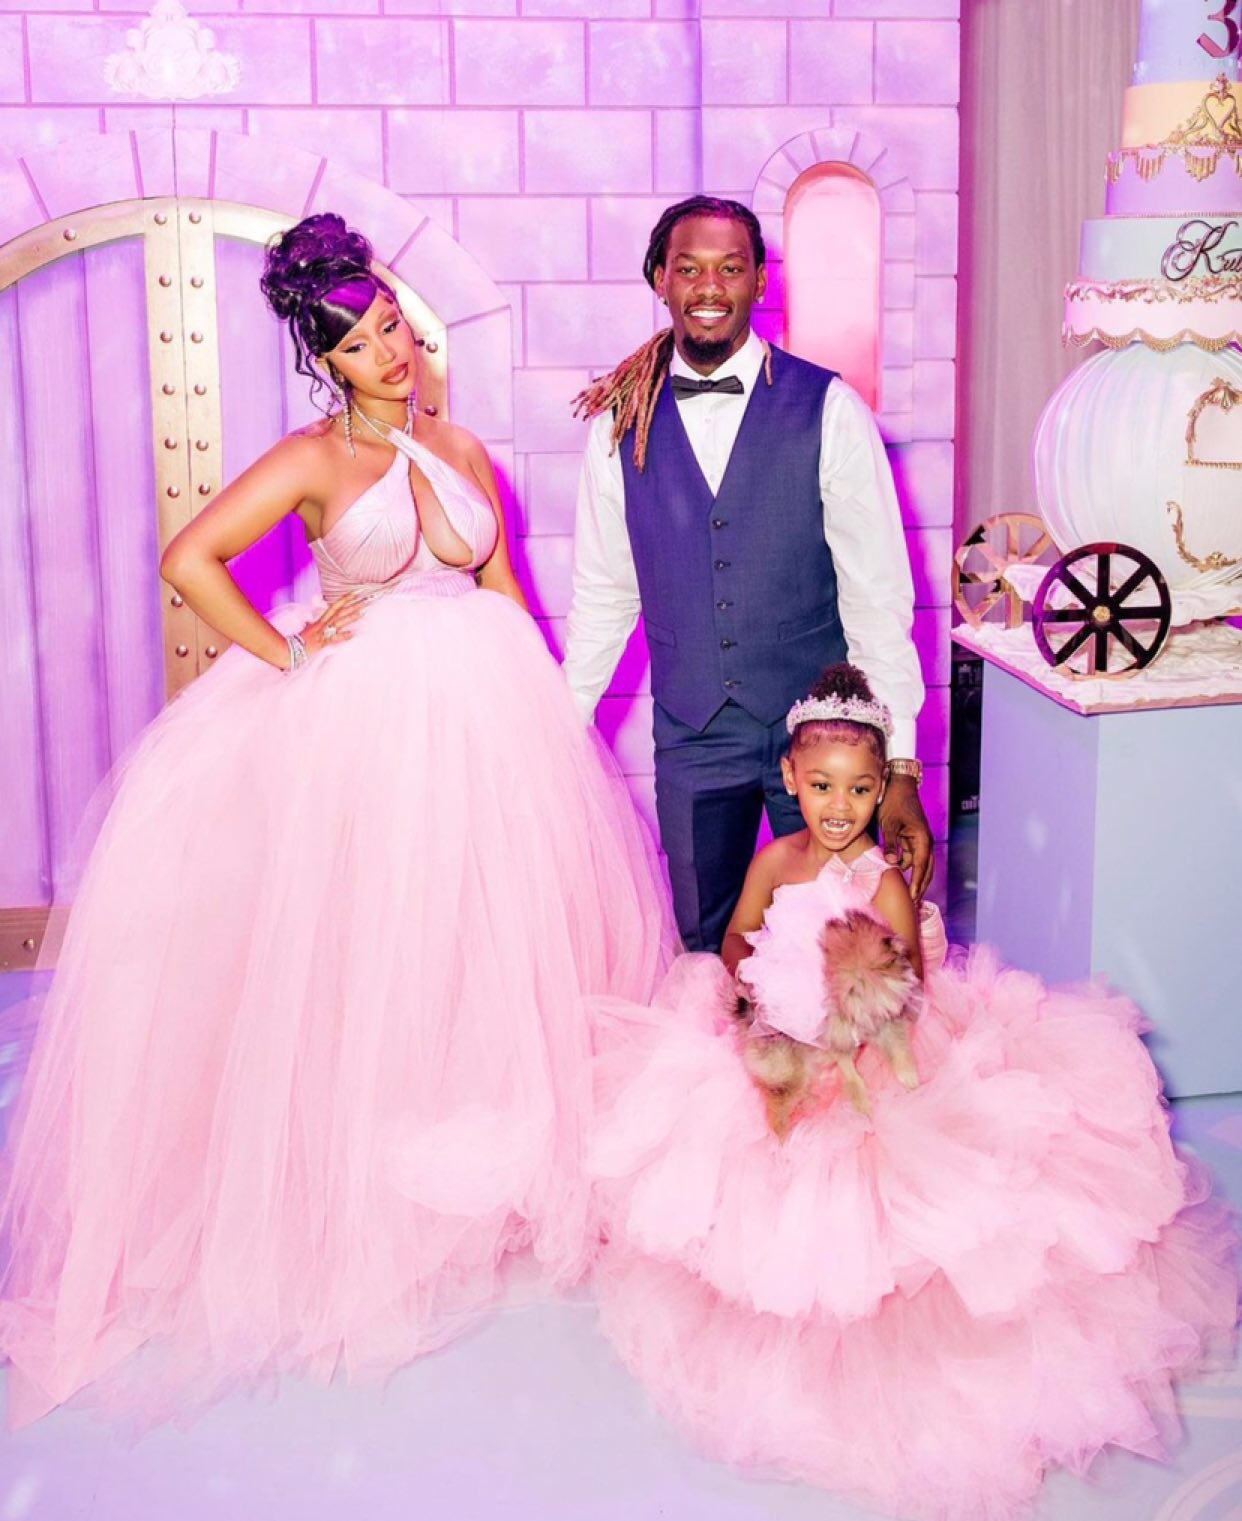 Did Cardi B And Offset Just Gift Their 3yr Old Daughter A Present Worth Quarter A Million Dollars?